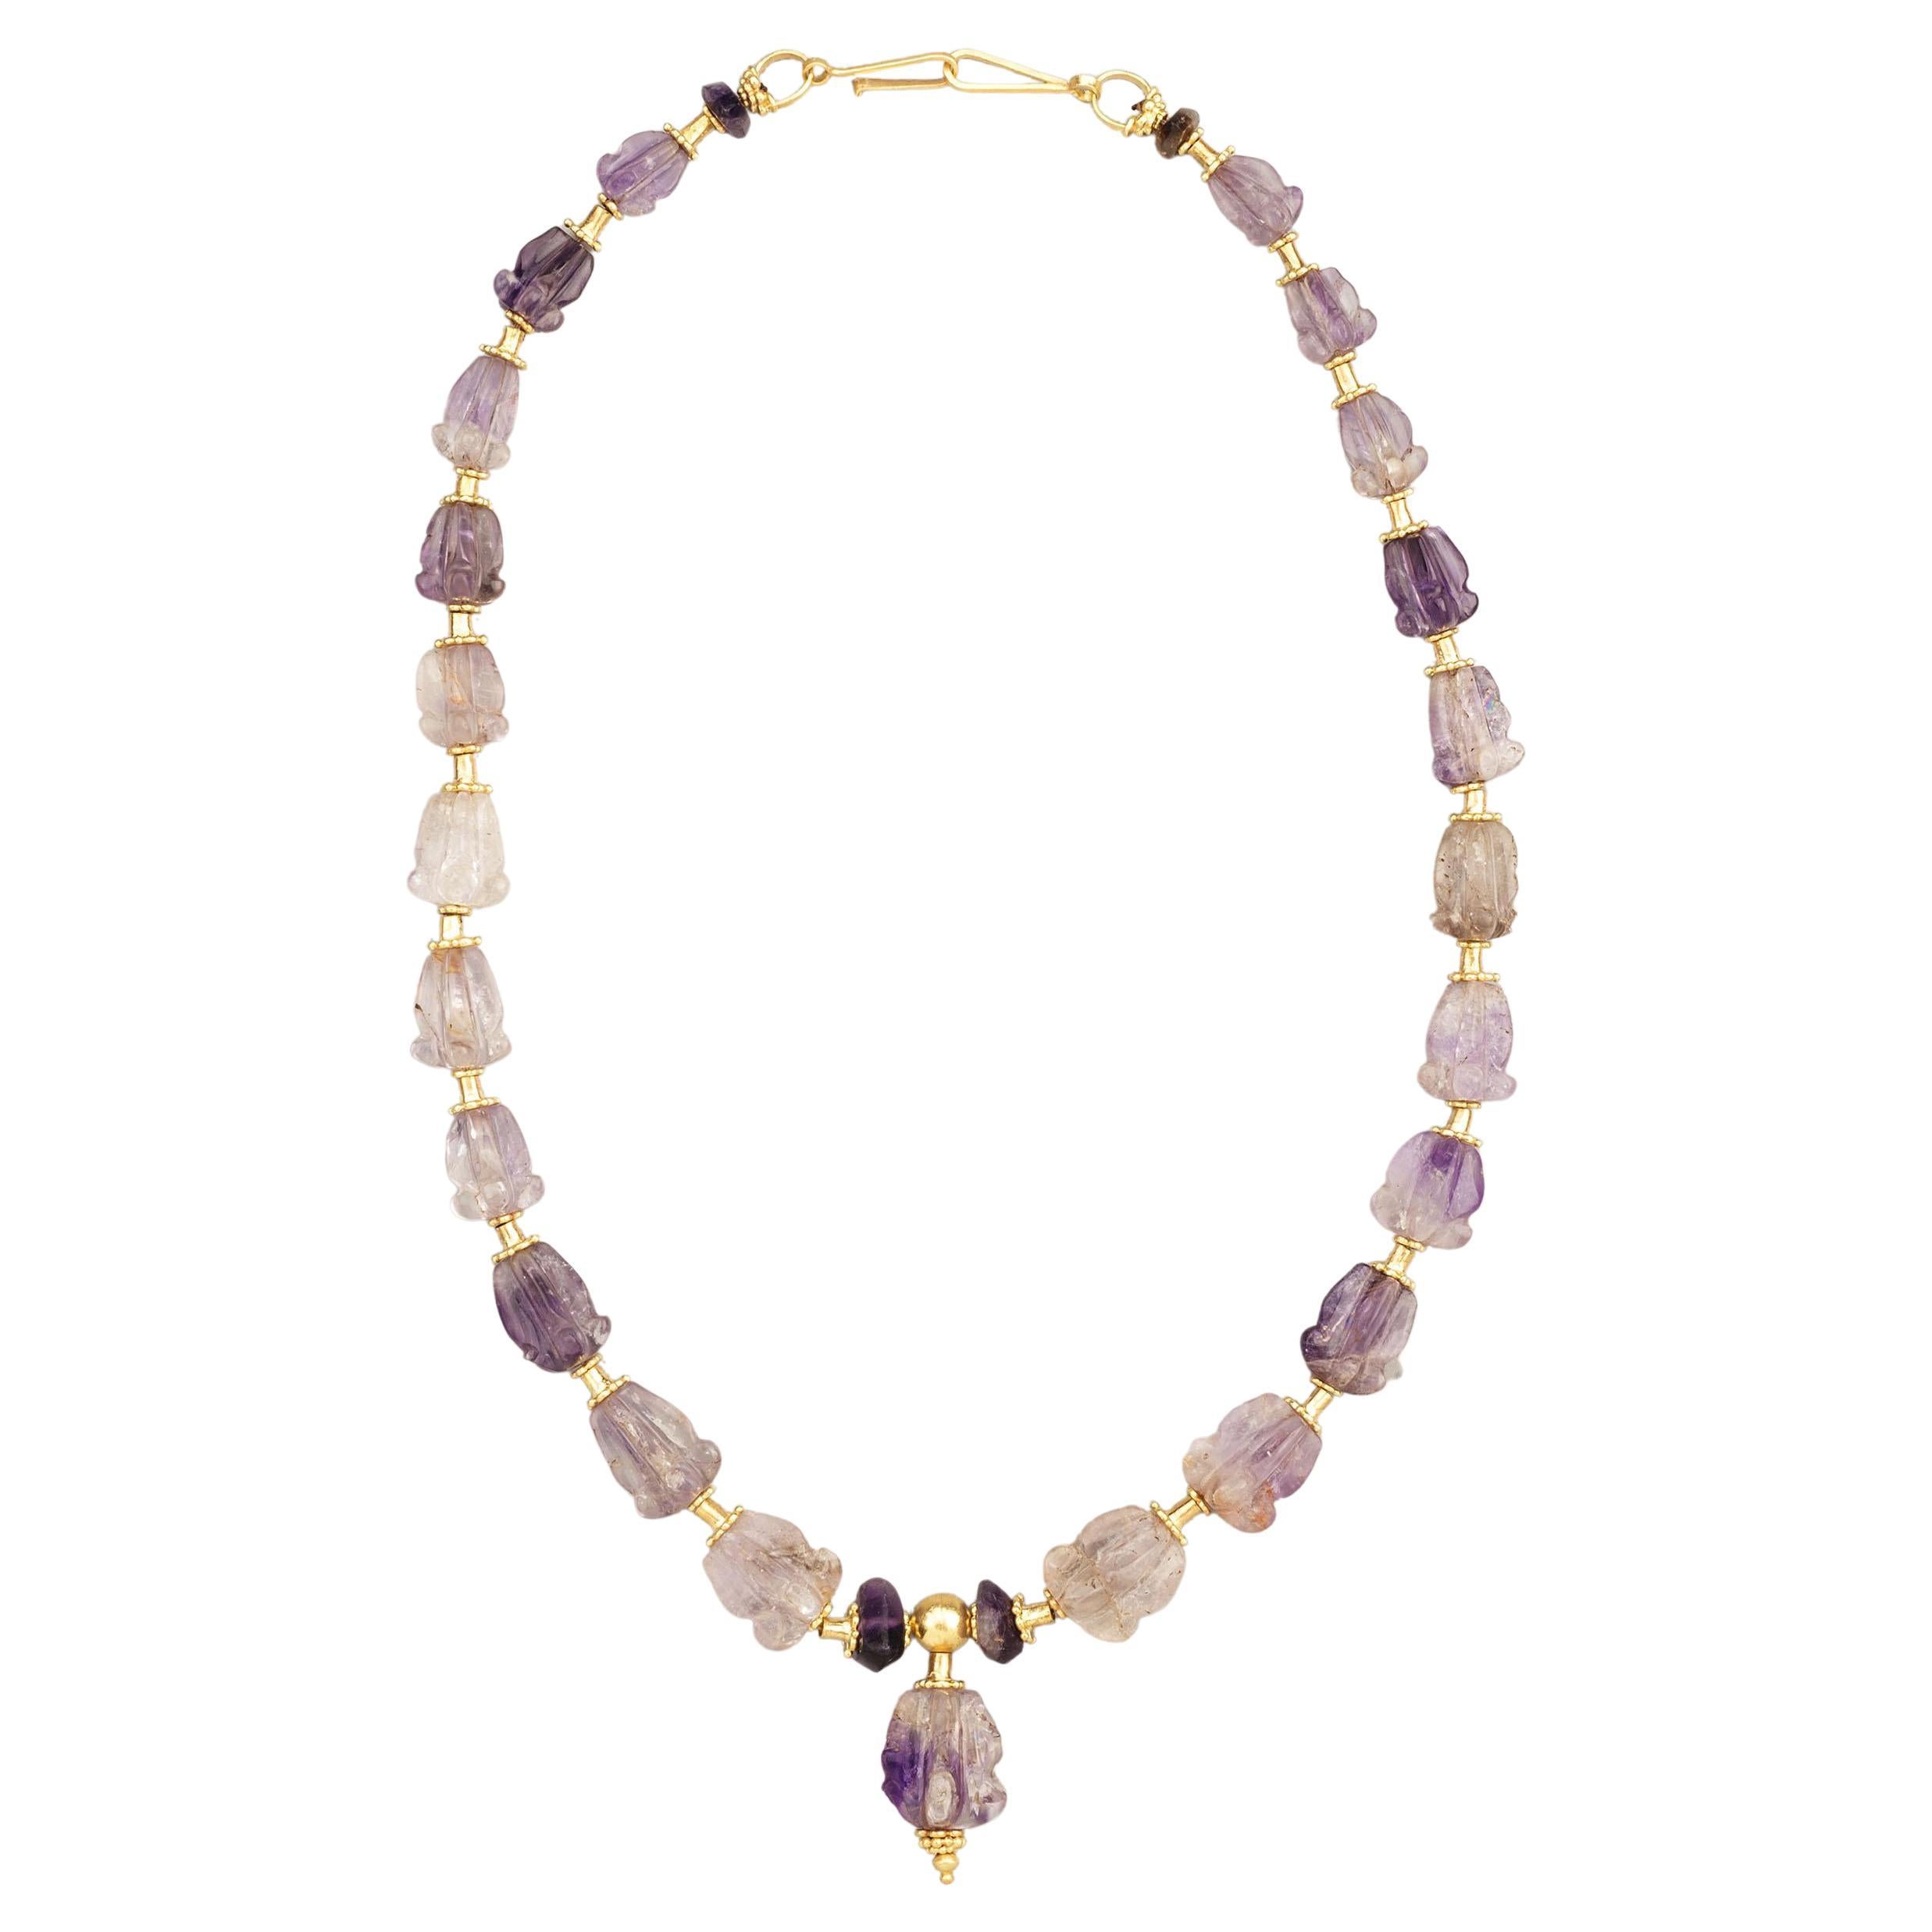 Ancient Carved Amethyst Crown Flower Bead Necklace with 22k Gold For Sale